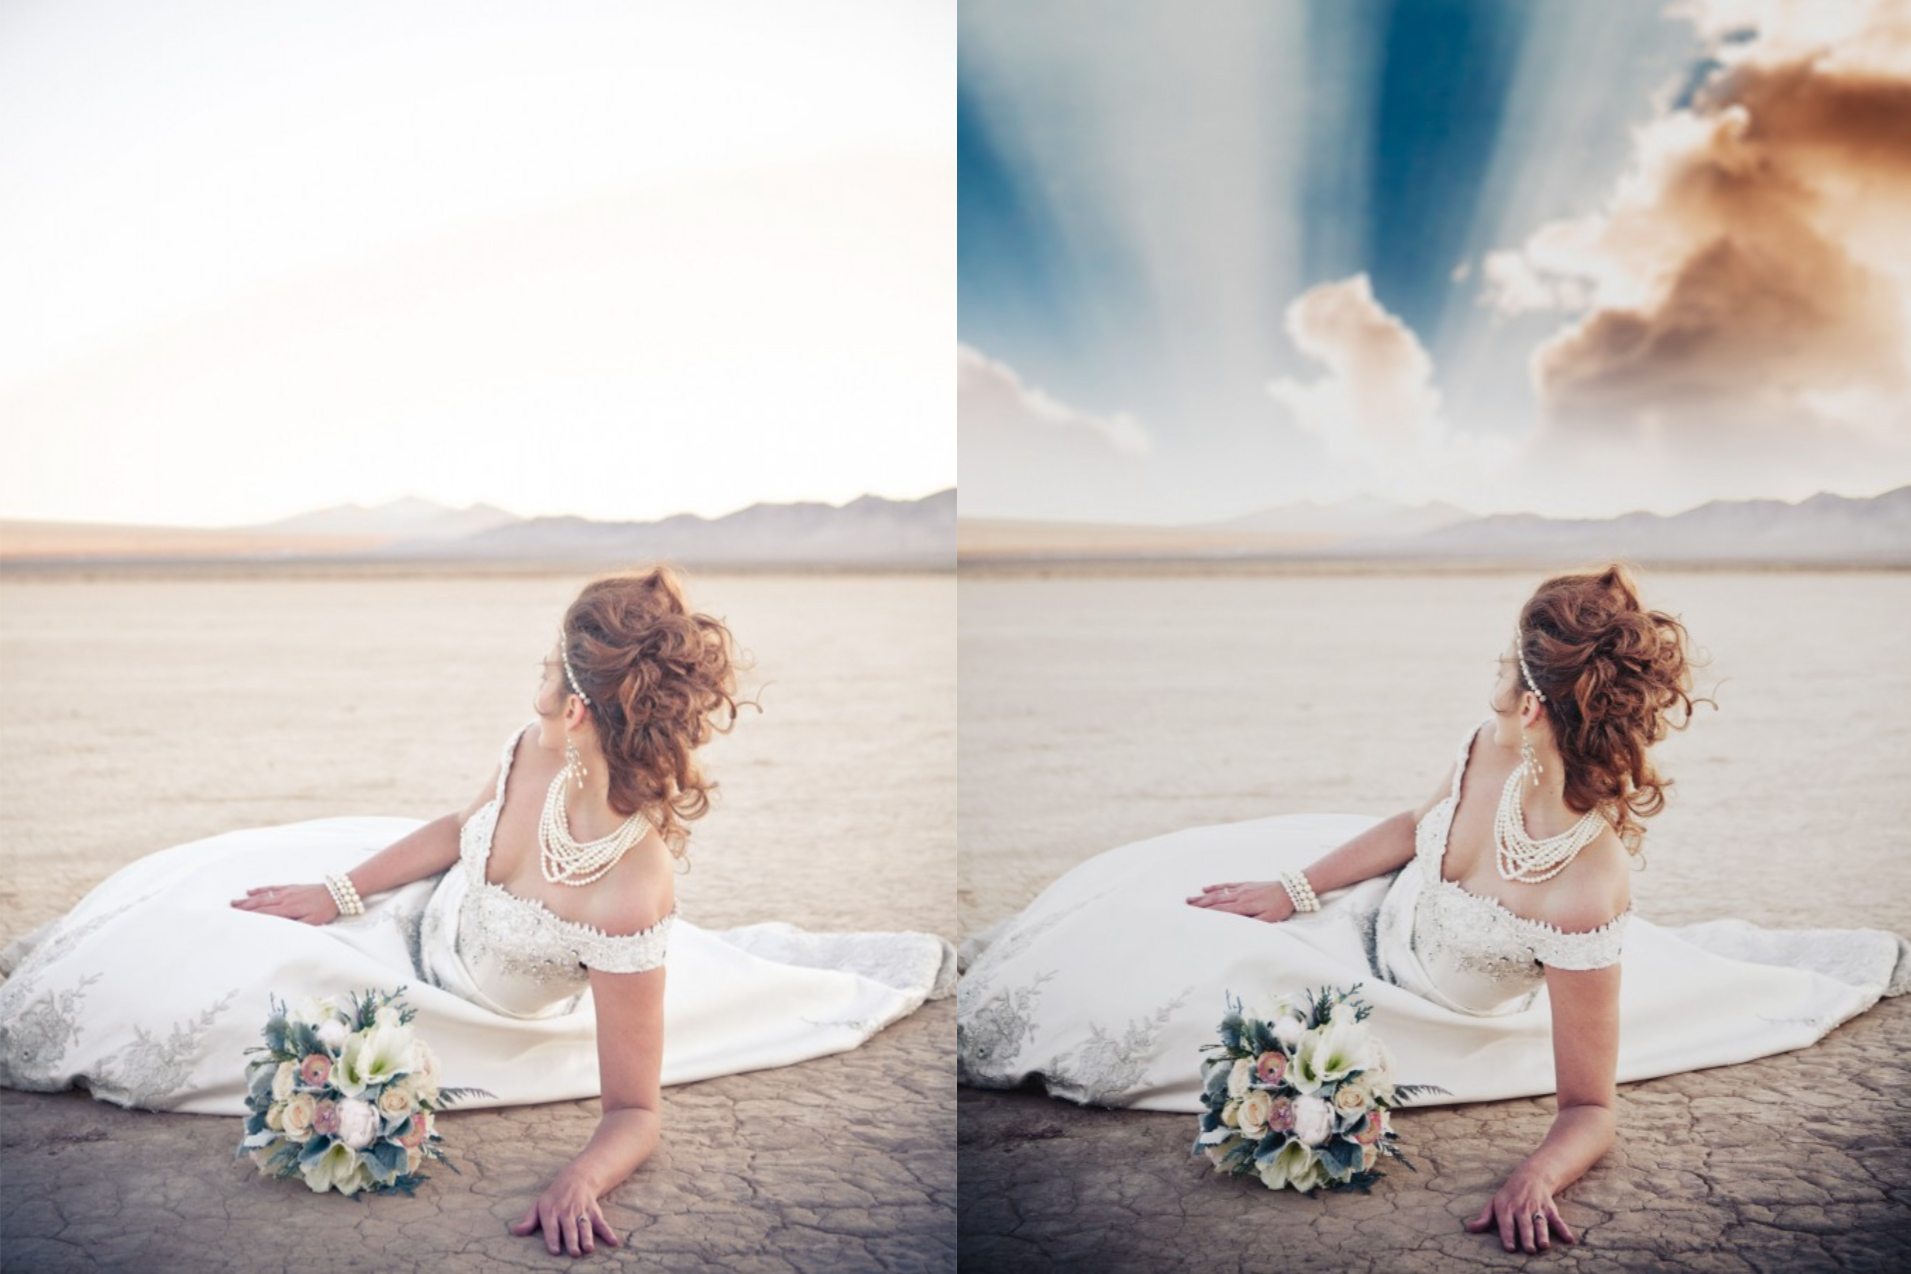 how to photoshop a sky into a photo before and after